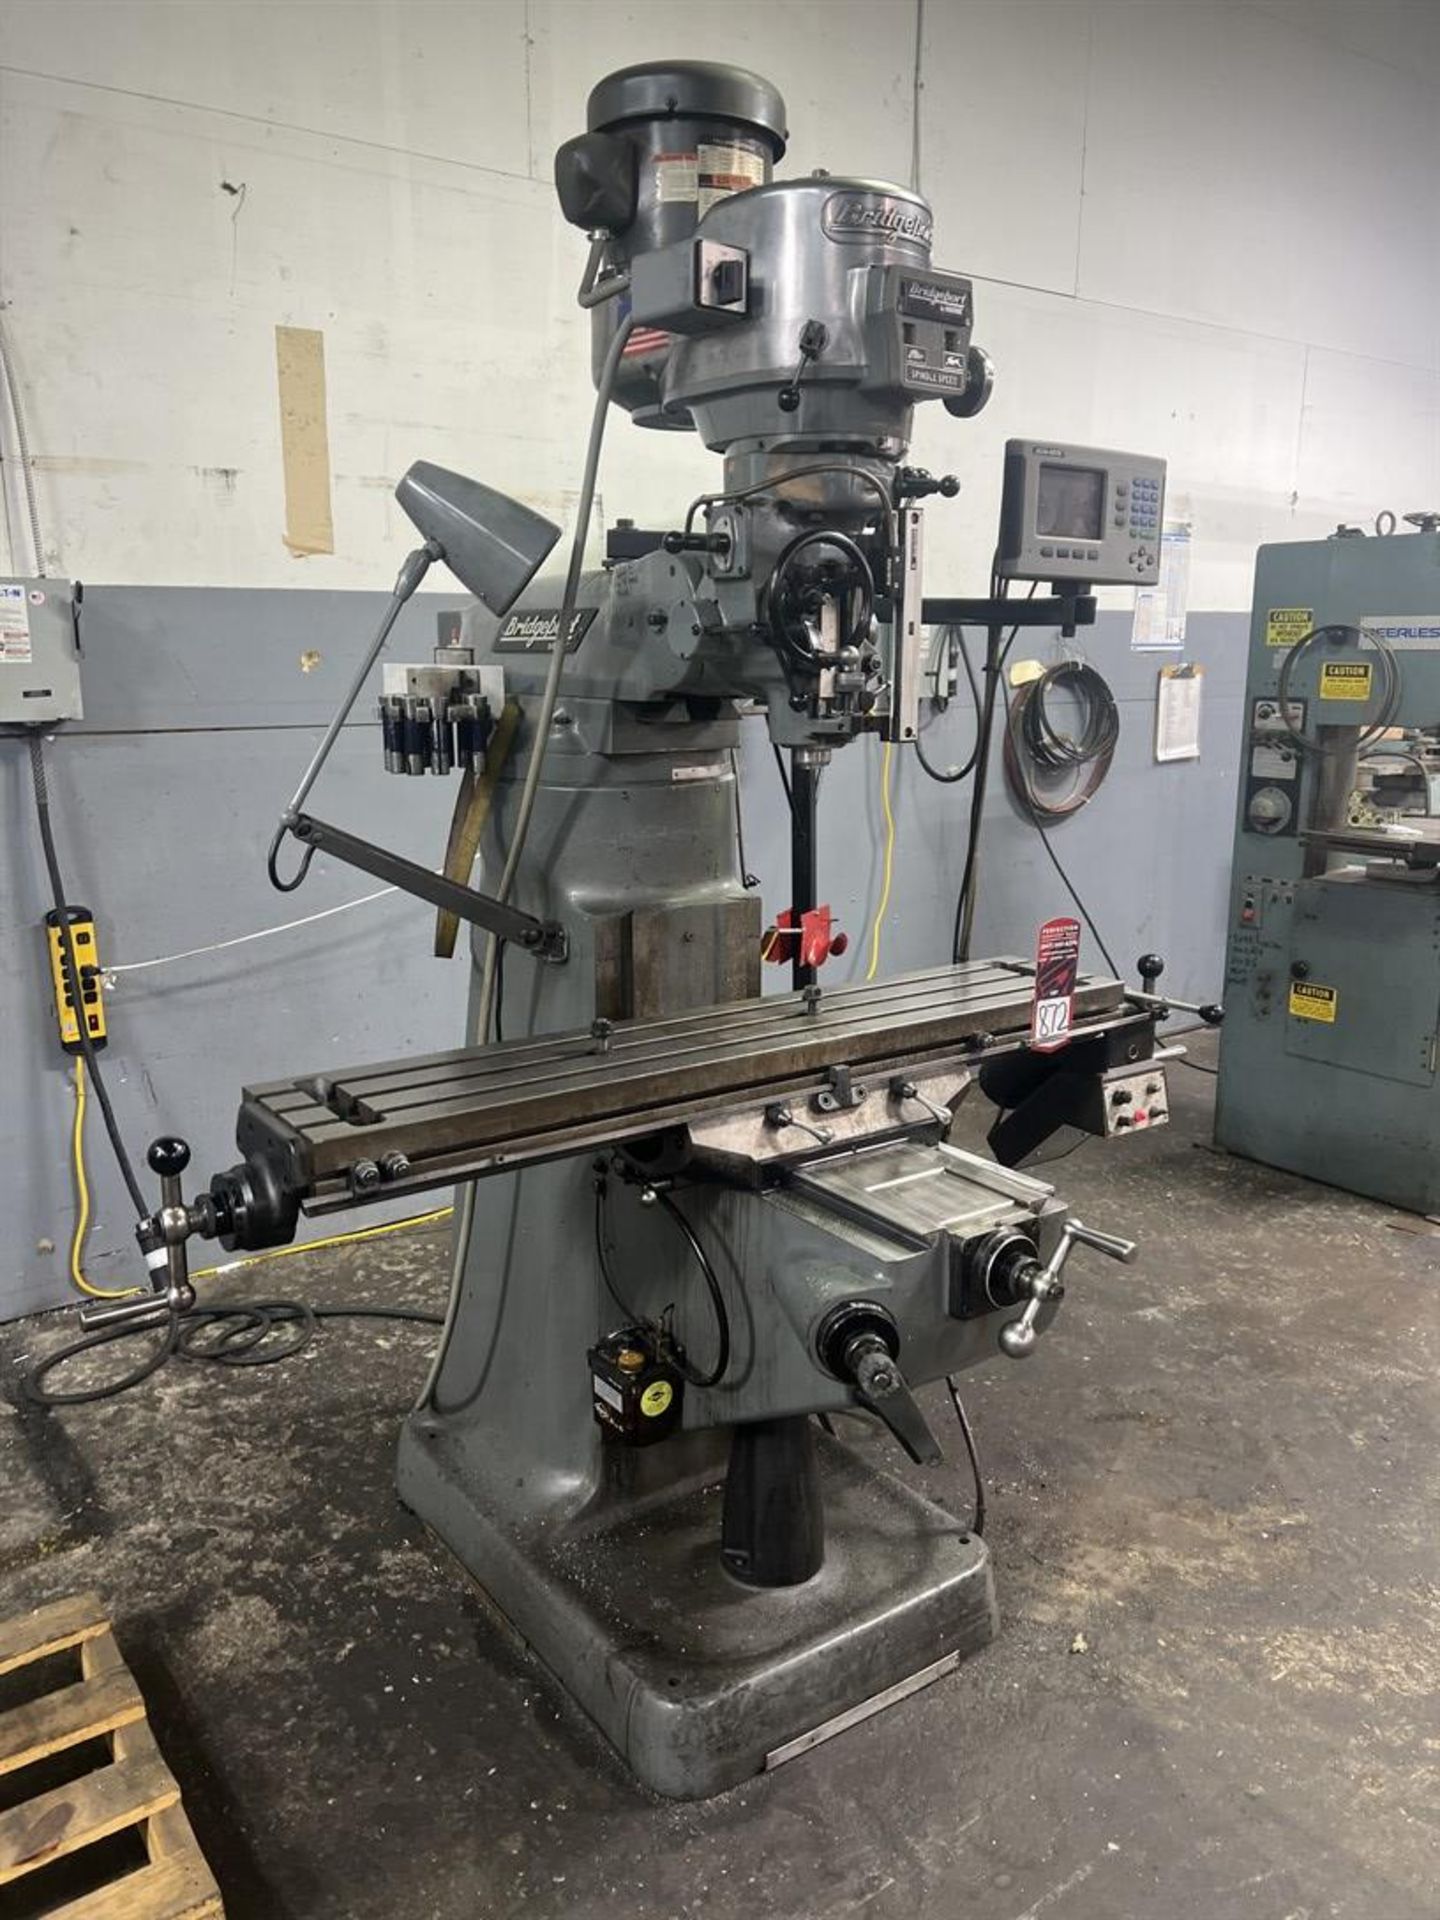 BRIDGEPORT Milling Machine, s/n HDNG1770, 9” x 48” Power Feed Table, 2 HP, Acu-Rite DRO - Image 2 of 6